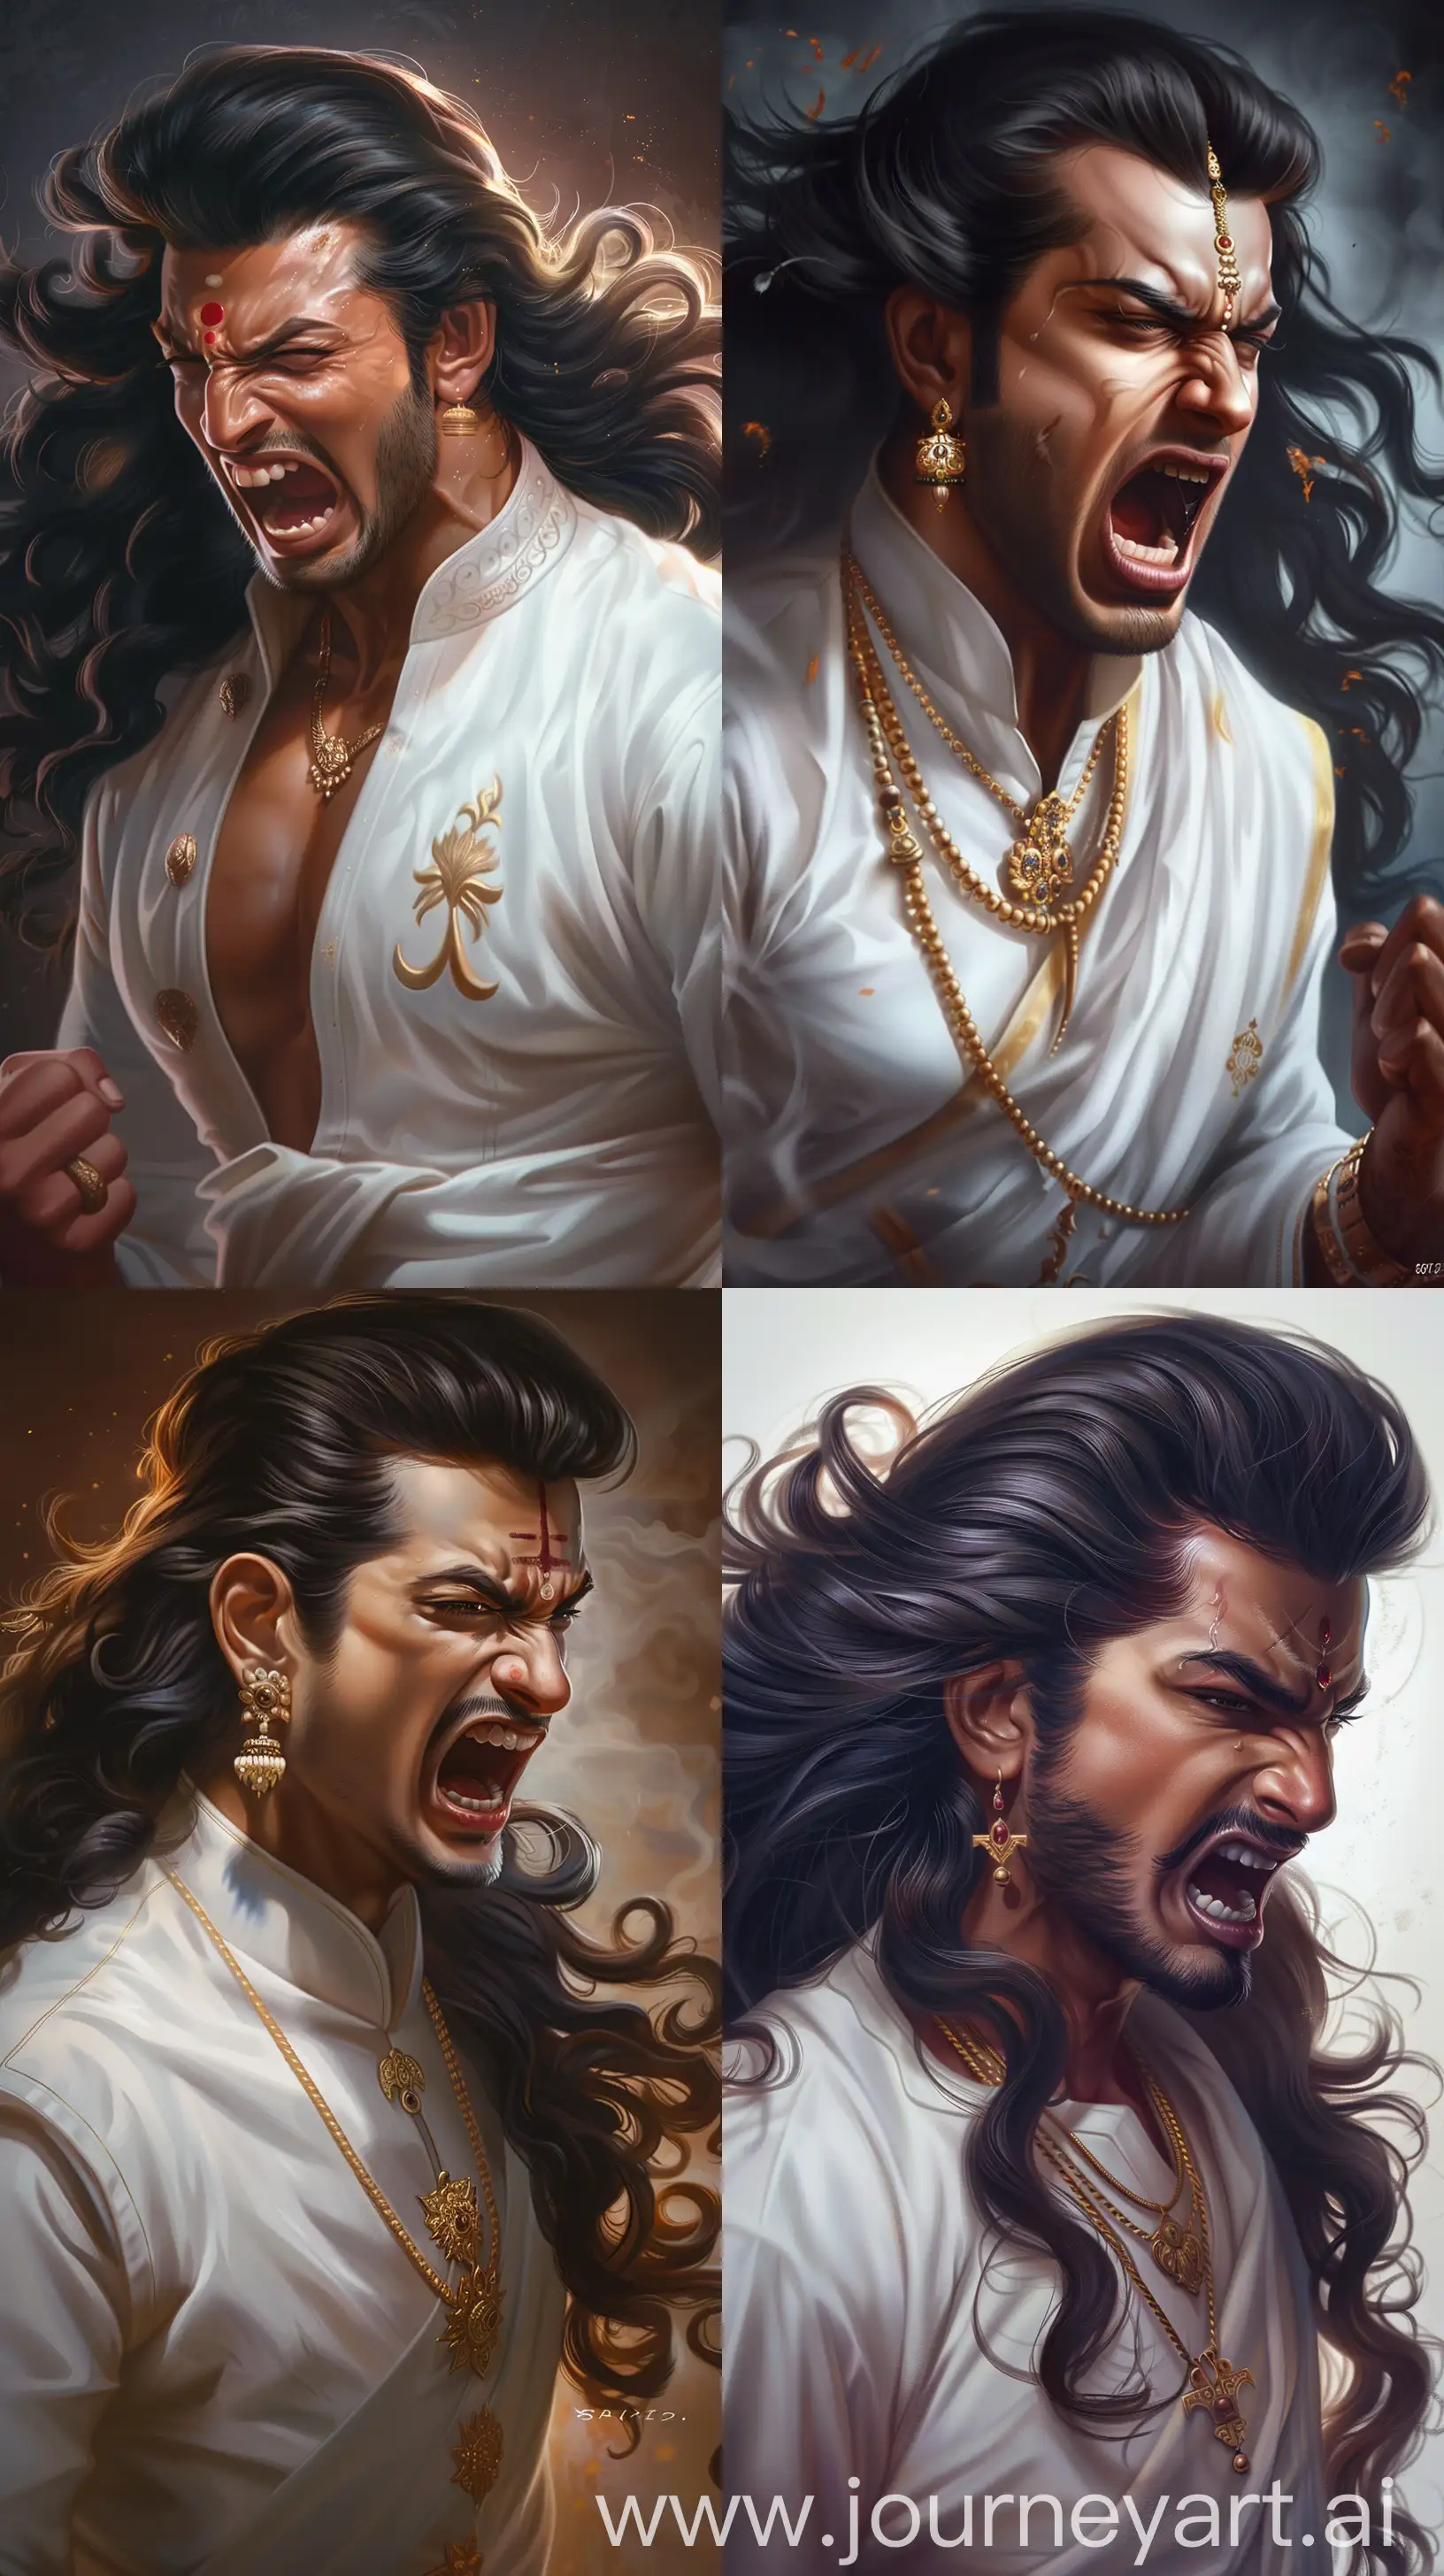 A Young Indian man in his early thirties, looks like a Royal, in white attire, black long wavy hair, clean shaven, angry look, yelling as if he's cursing someone, intricate details, 8k quality images --ar 9:16 --sref https://i.postimg.cc/rwMQrCbT/tuandev07-57564-Images-depicting-the-Wind-deity-from-Hinduism-n-1570fbac-0763-49d2-8205-ce15582079a4.png 